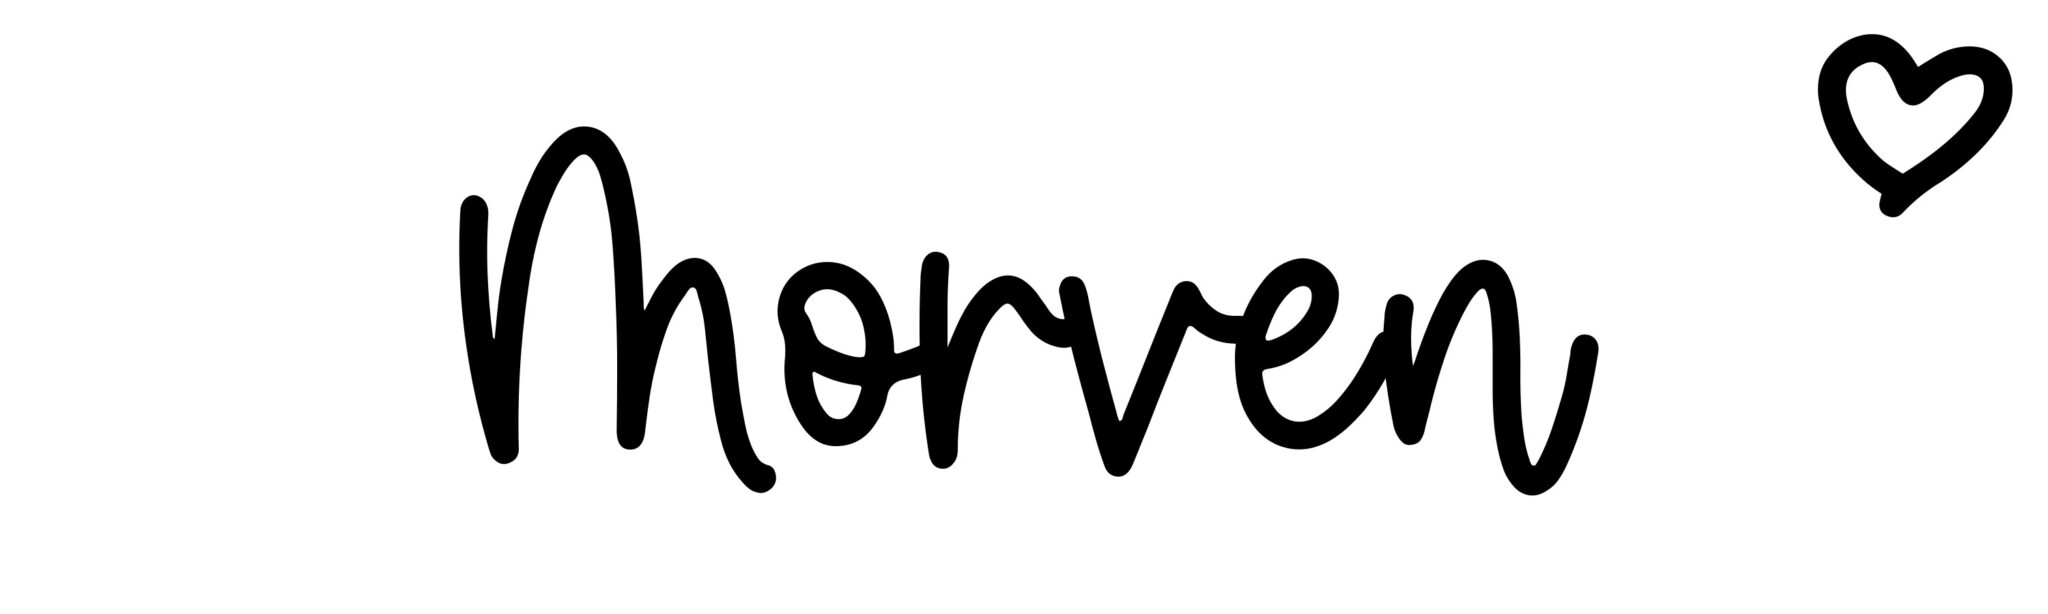 Morven - Name meaning, origin, variations and more